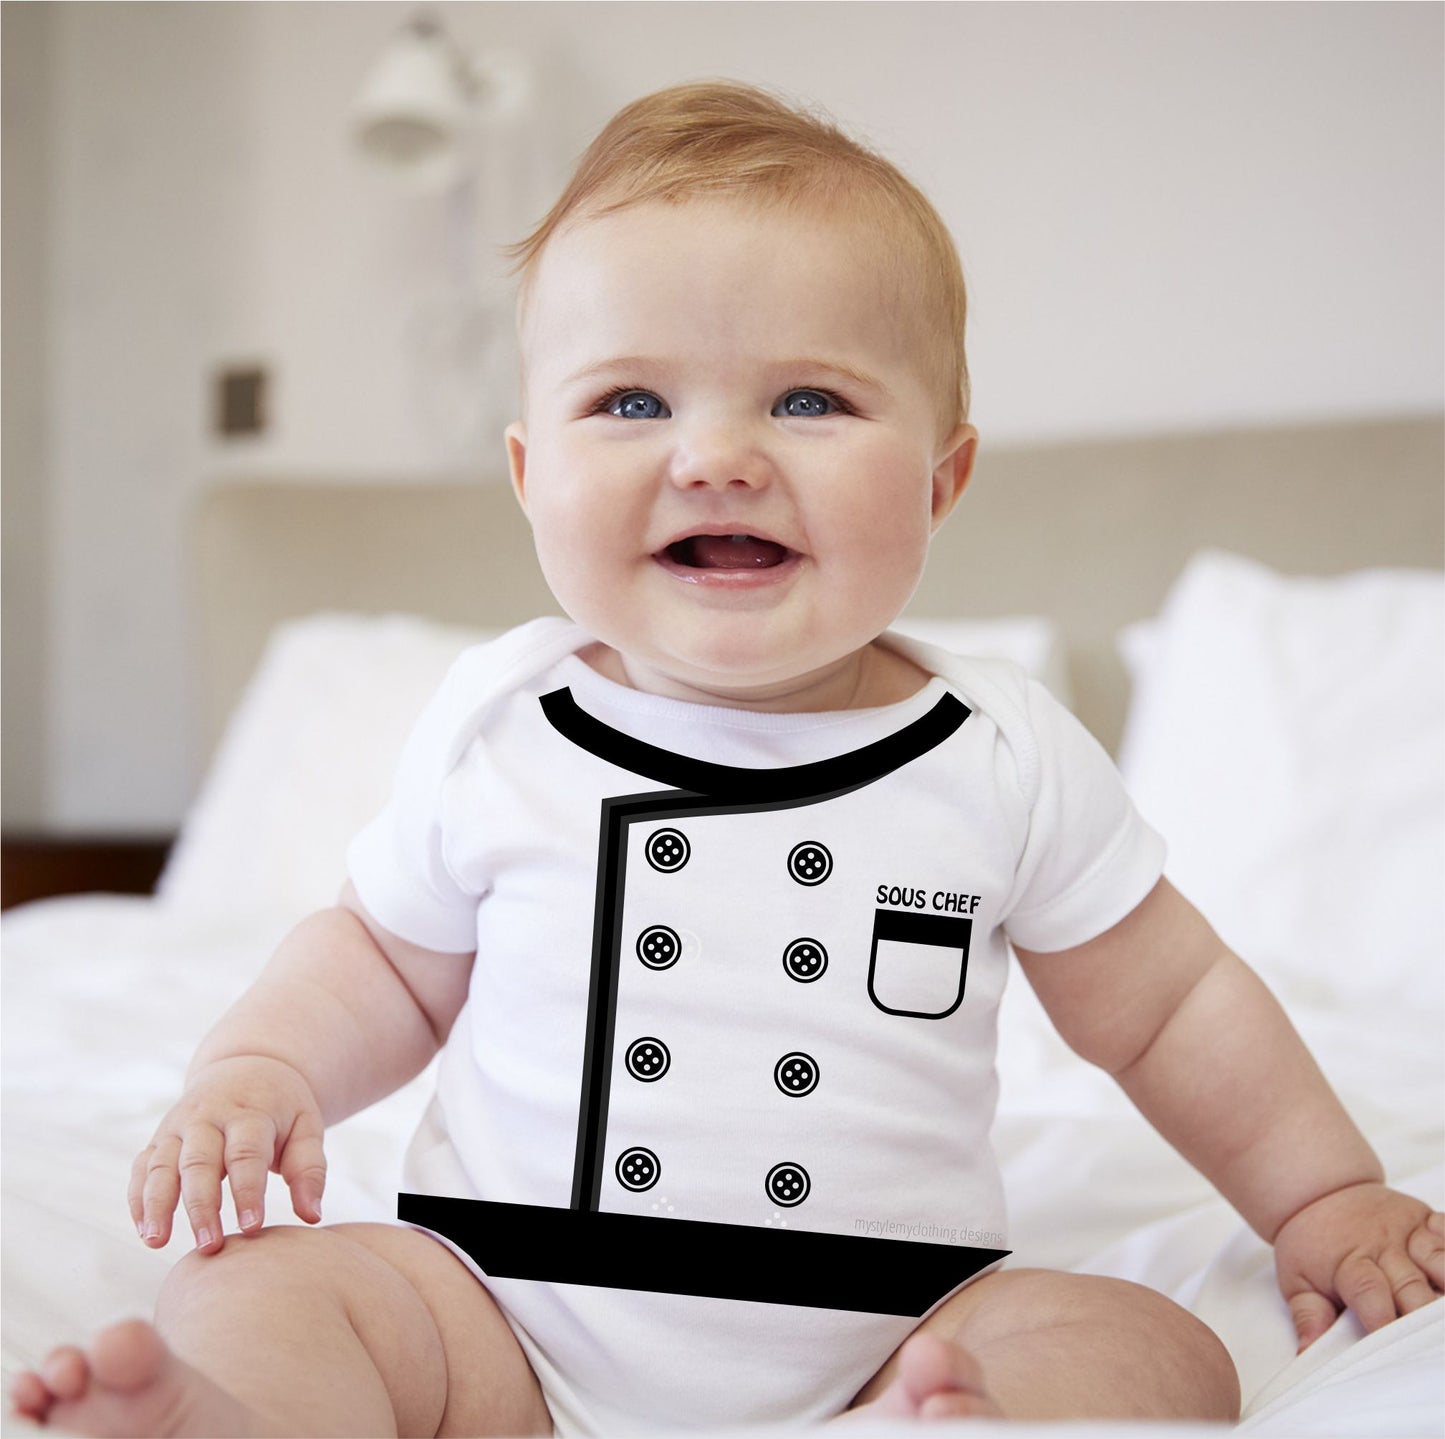 Baby Career Onesies -Sous Chef with FREE Name Print - MYSTYLEMYCLOTHING